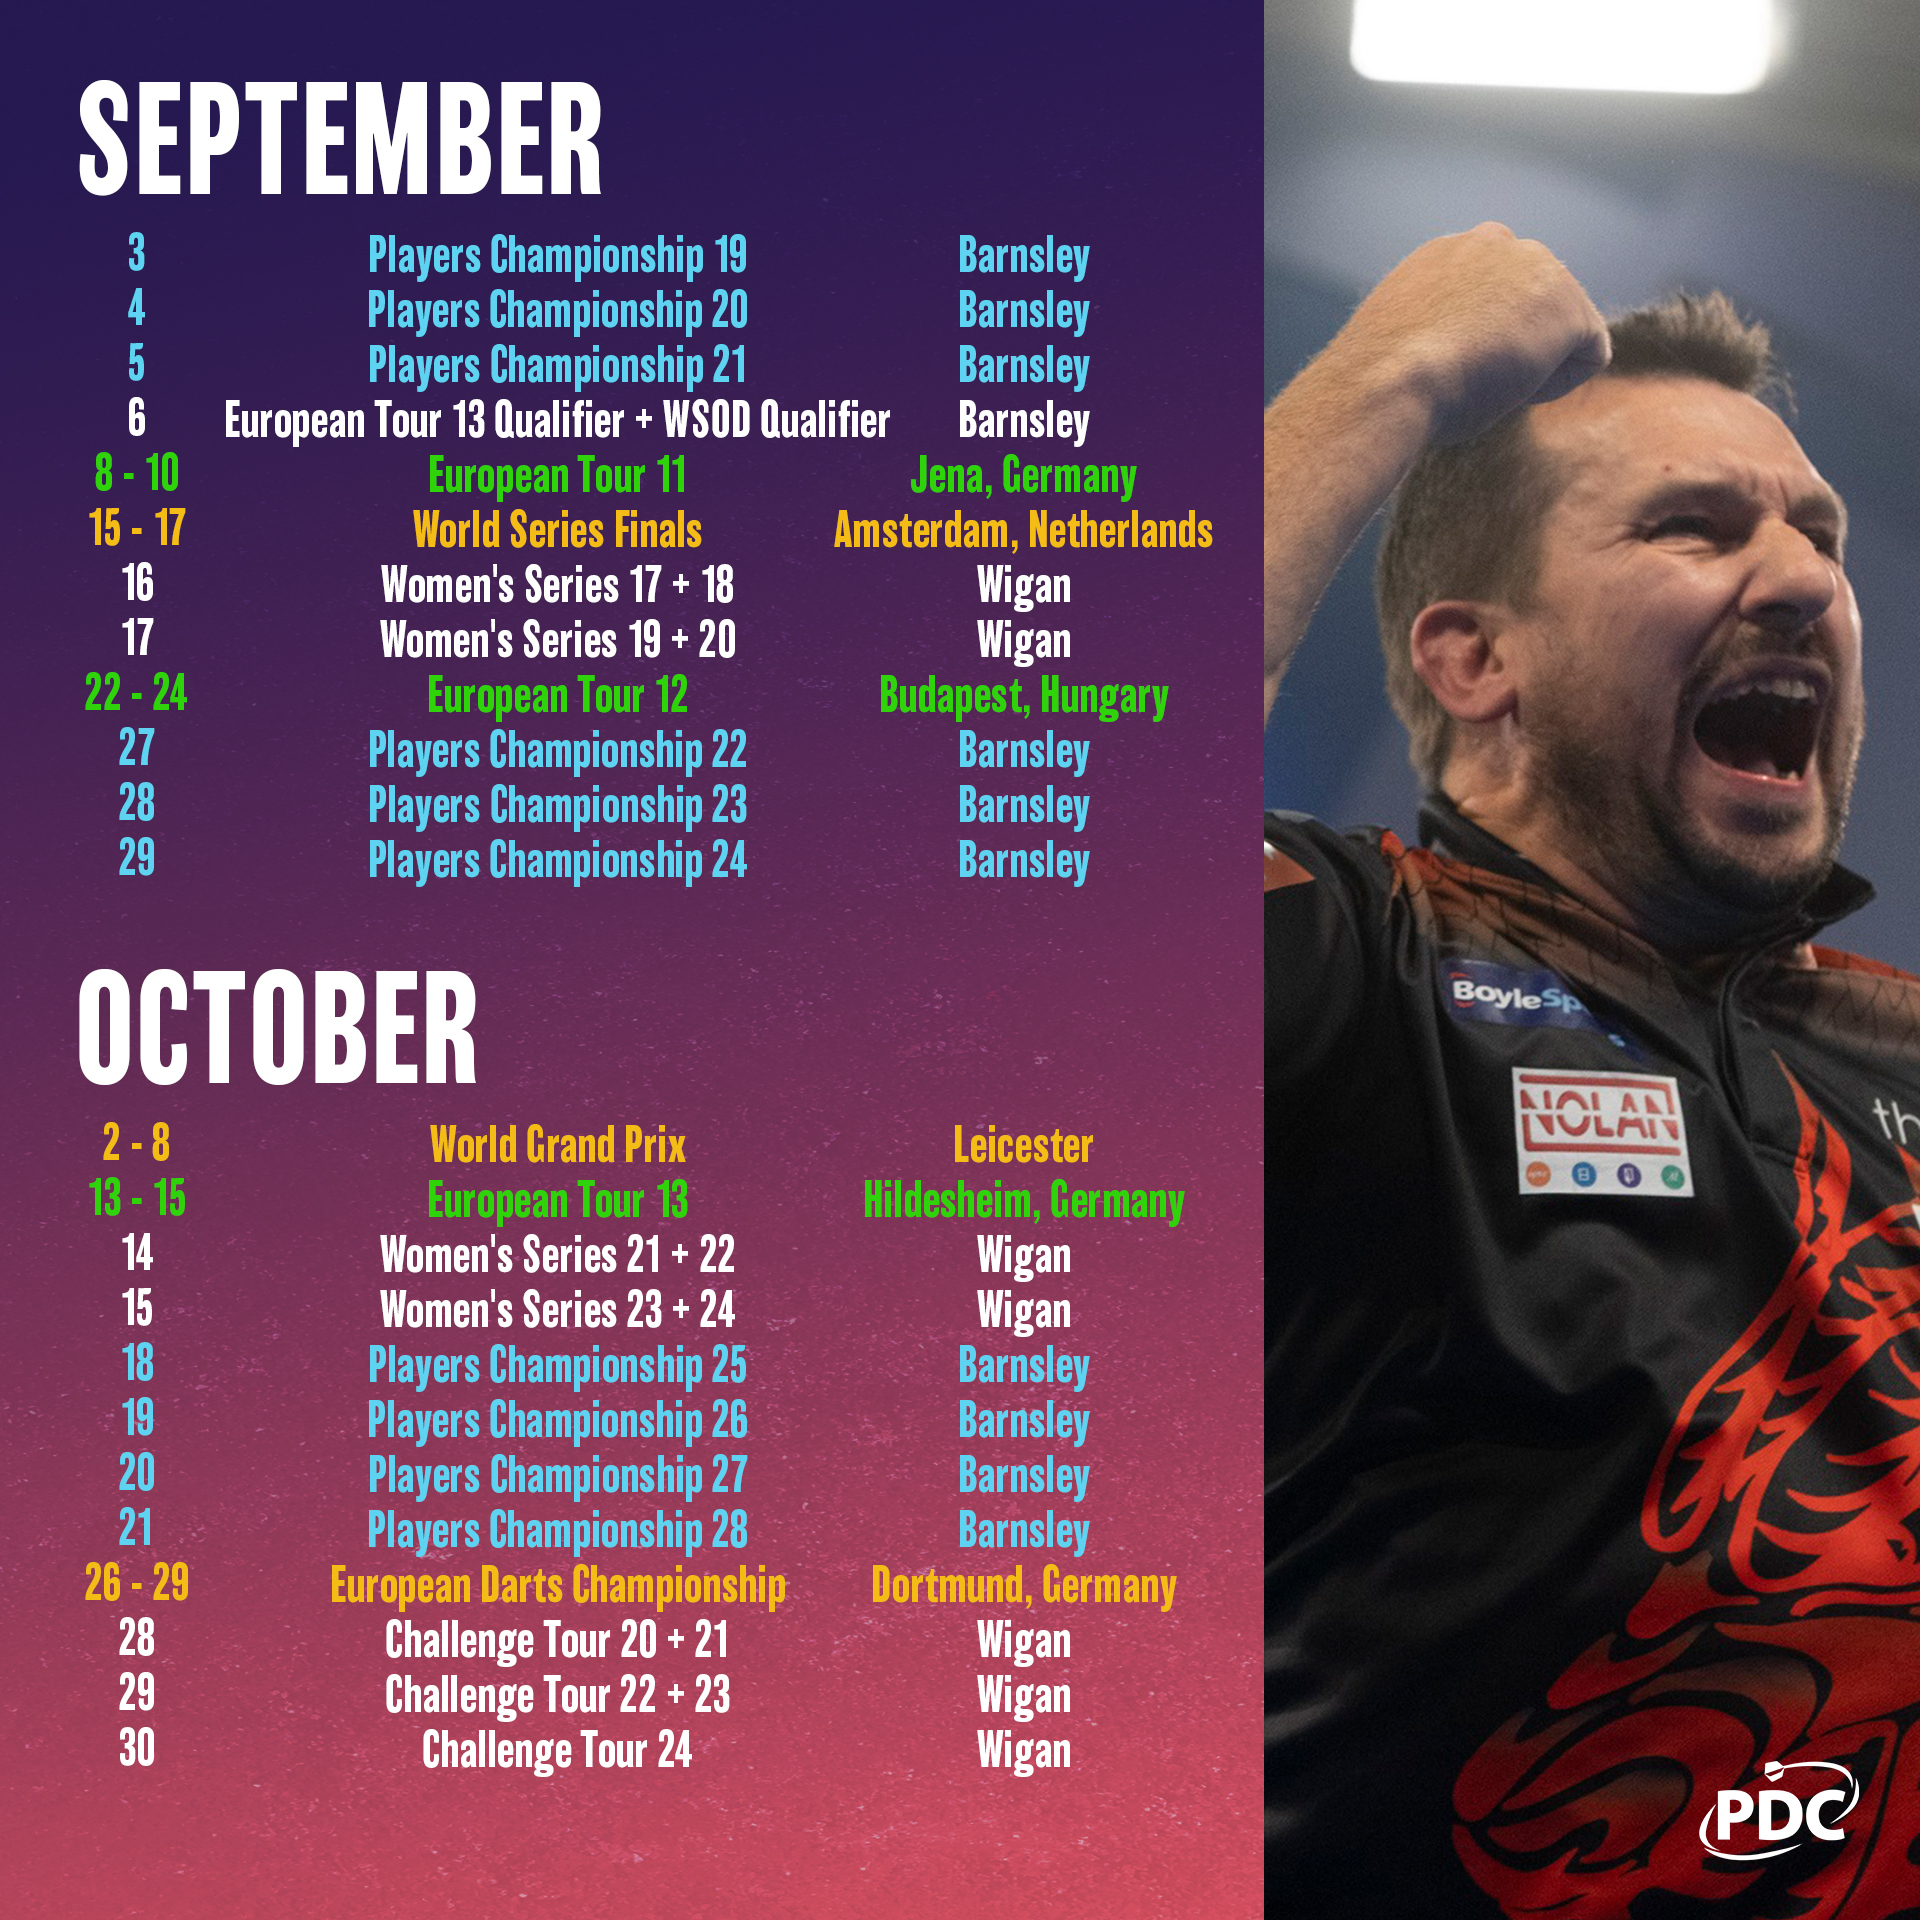 Are there too many unranked darts tournaments and is the calendar